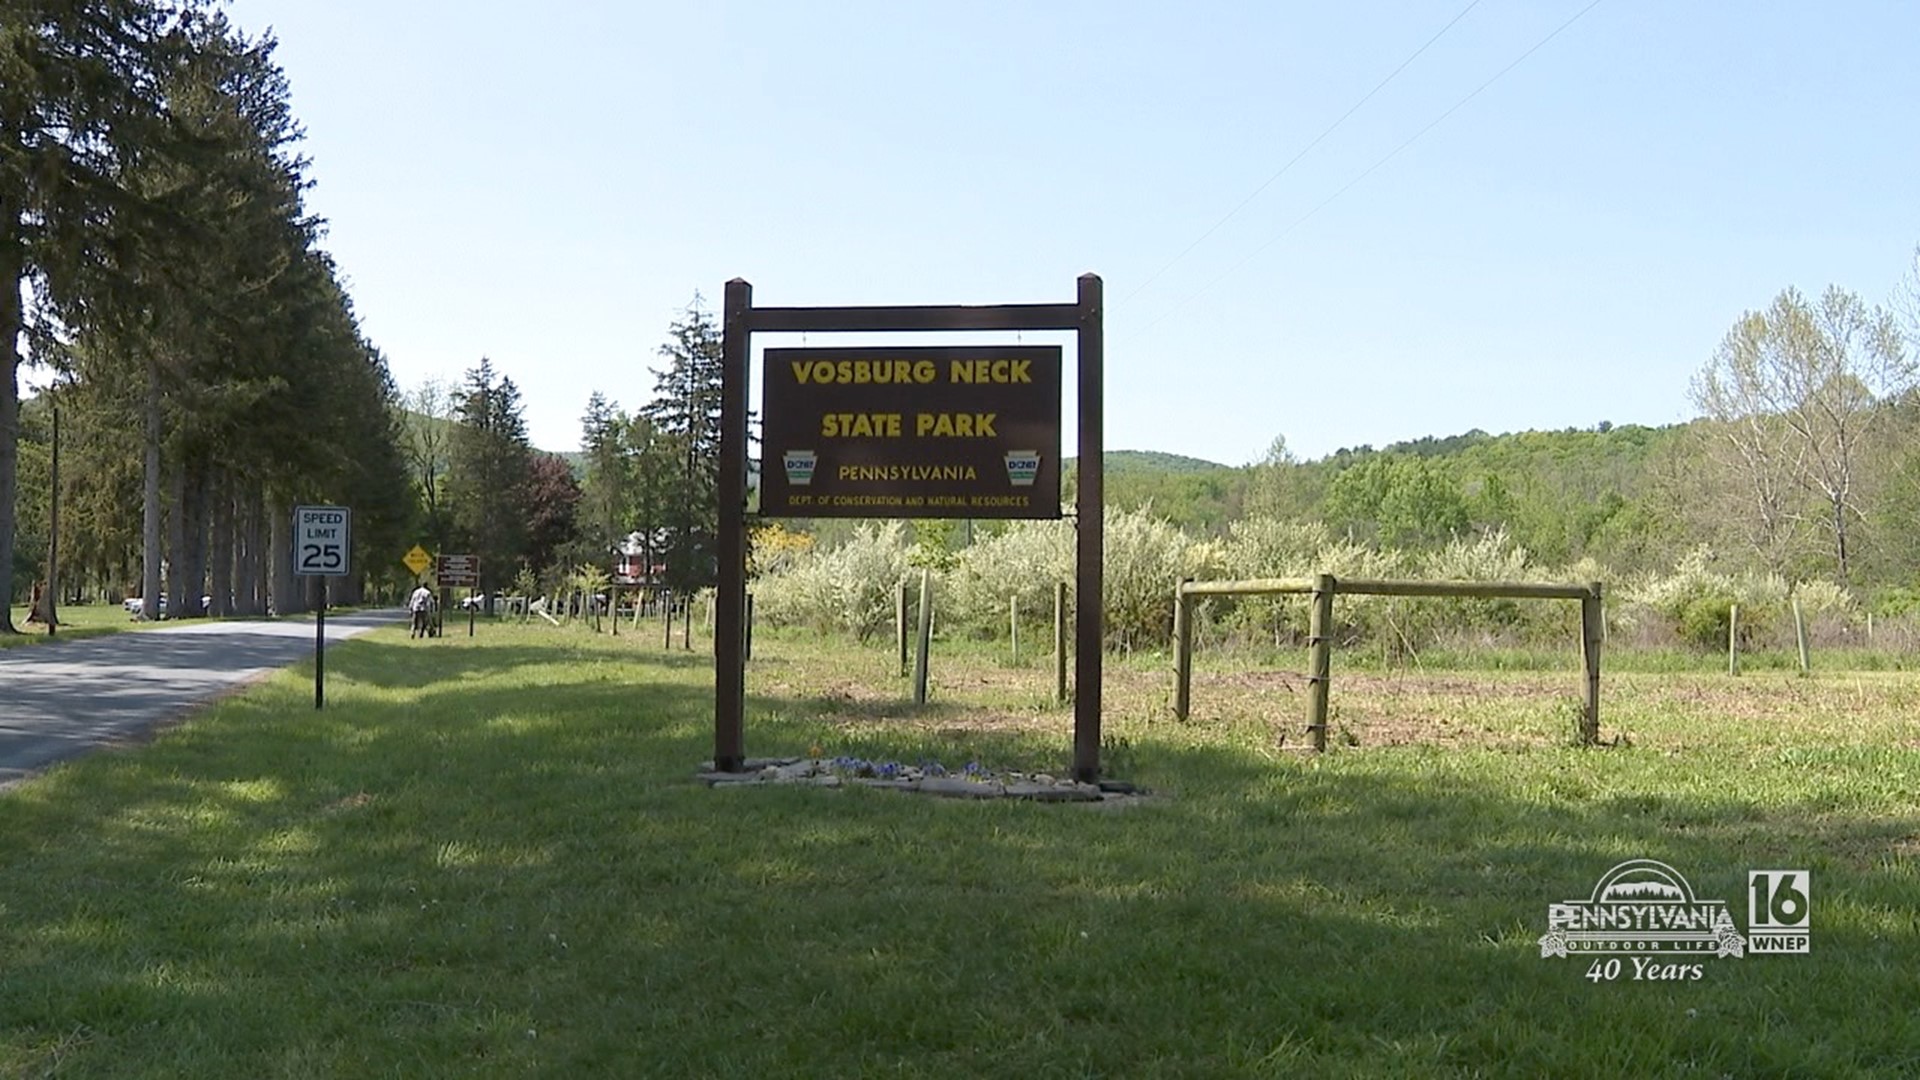 The newest and only state park in Wyoming County.